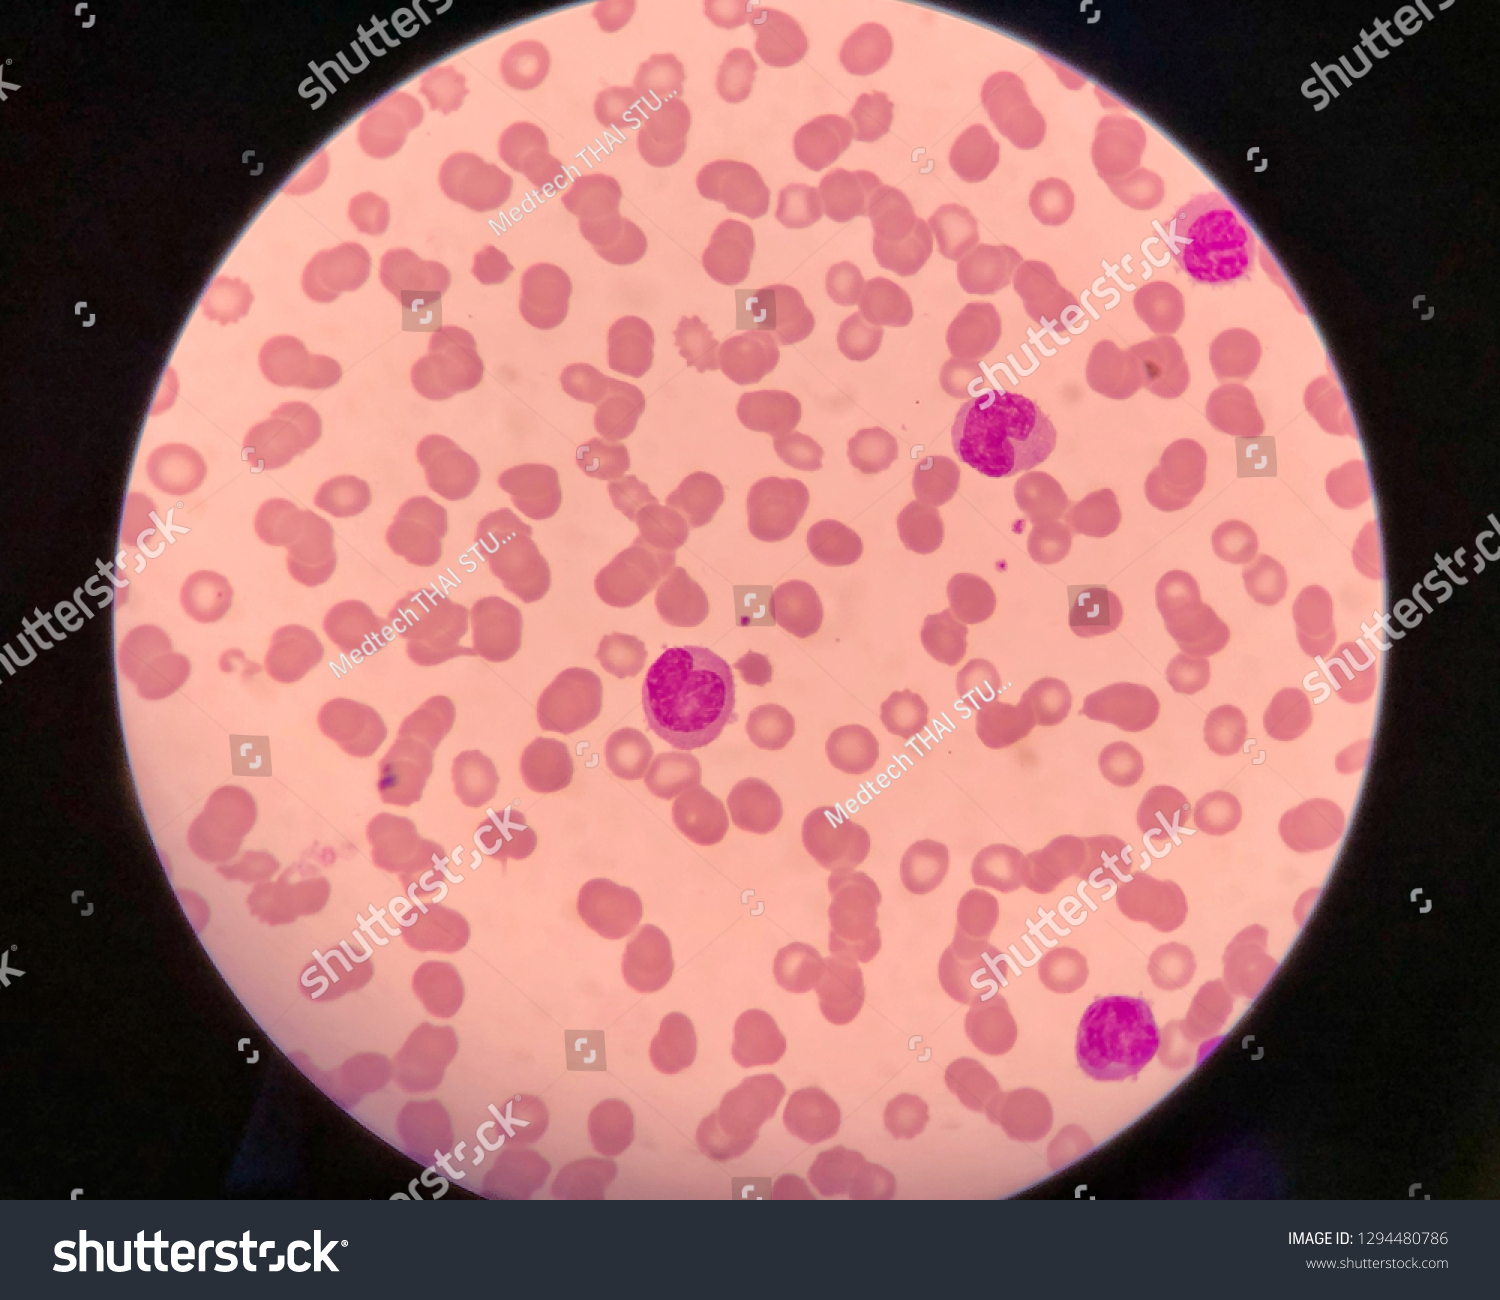 Under Microscope Showing Cell Stock Photo 1294480786 Shutterstock